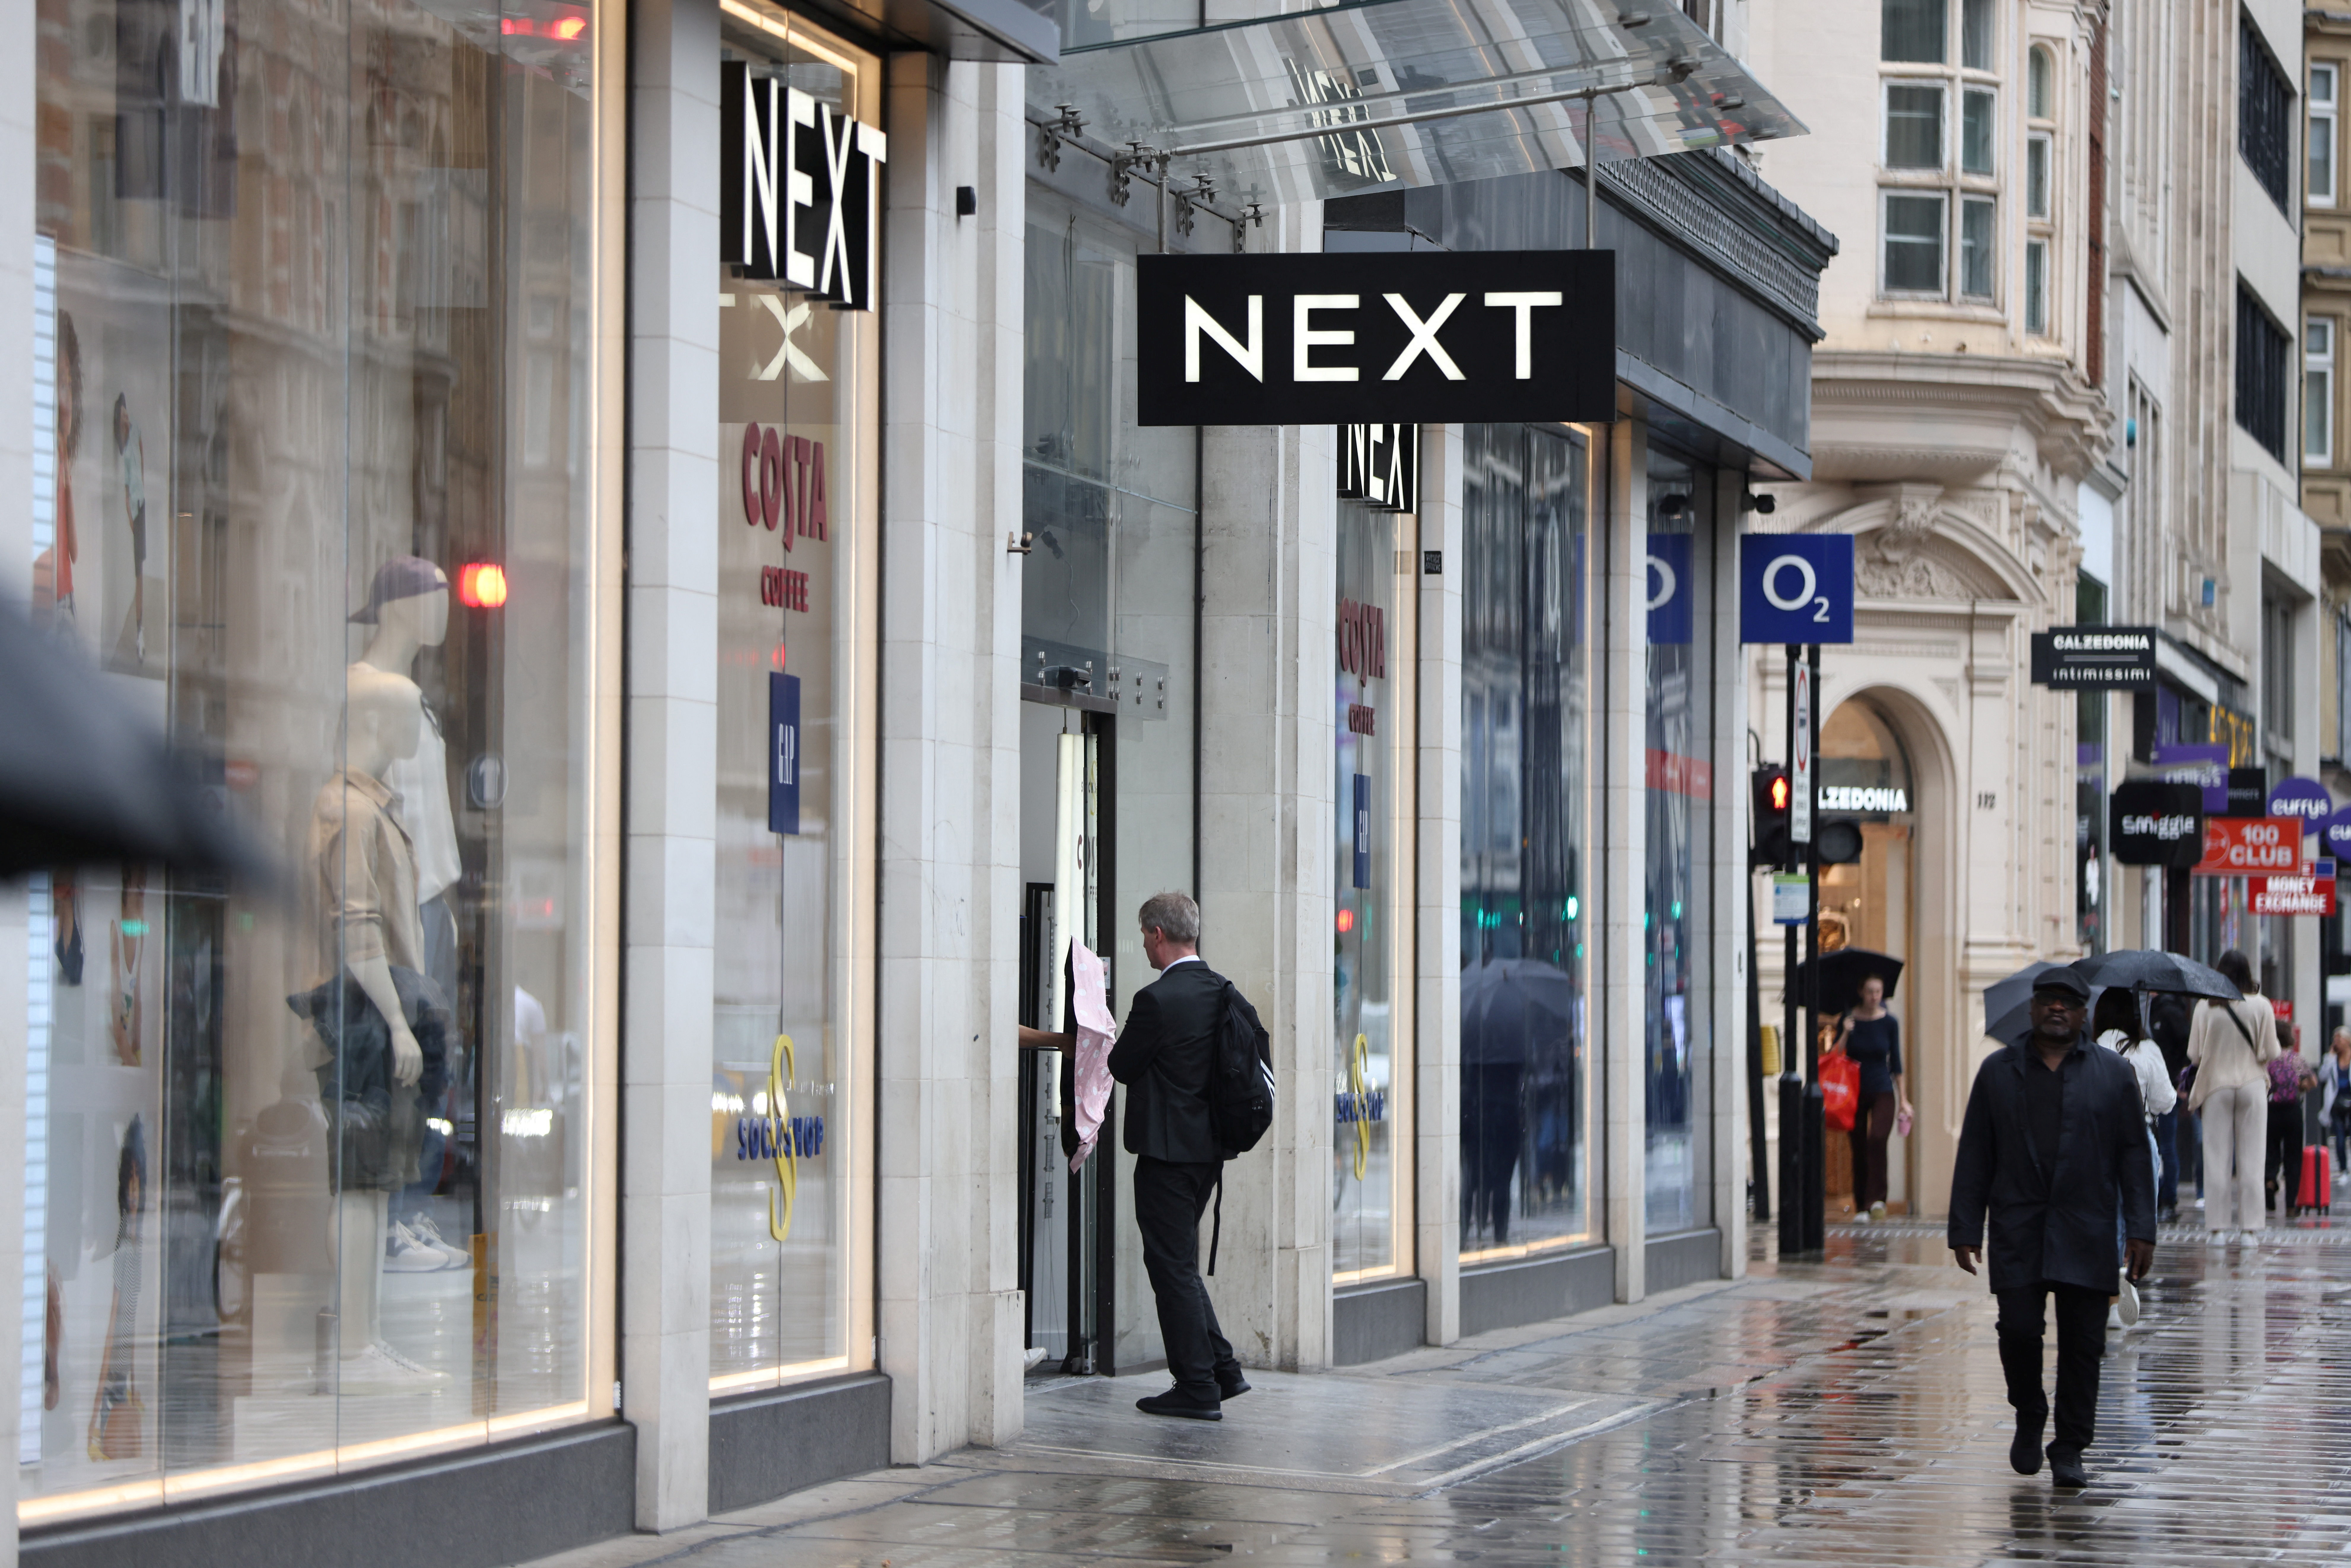 us'A shopper enters a Next store on Oxford Street in London